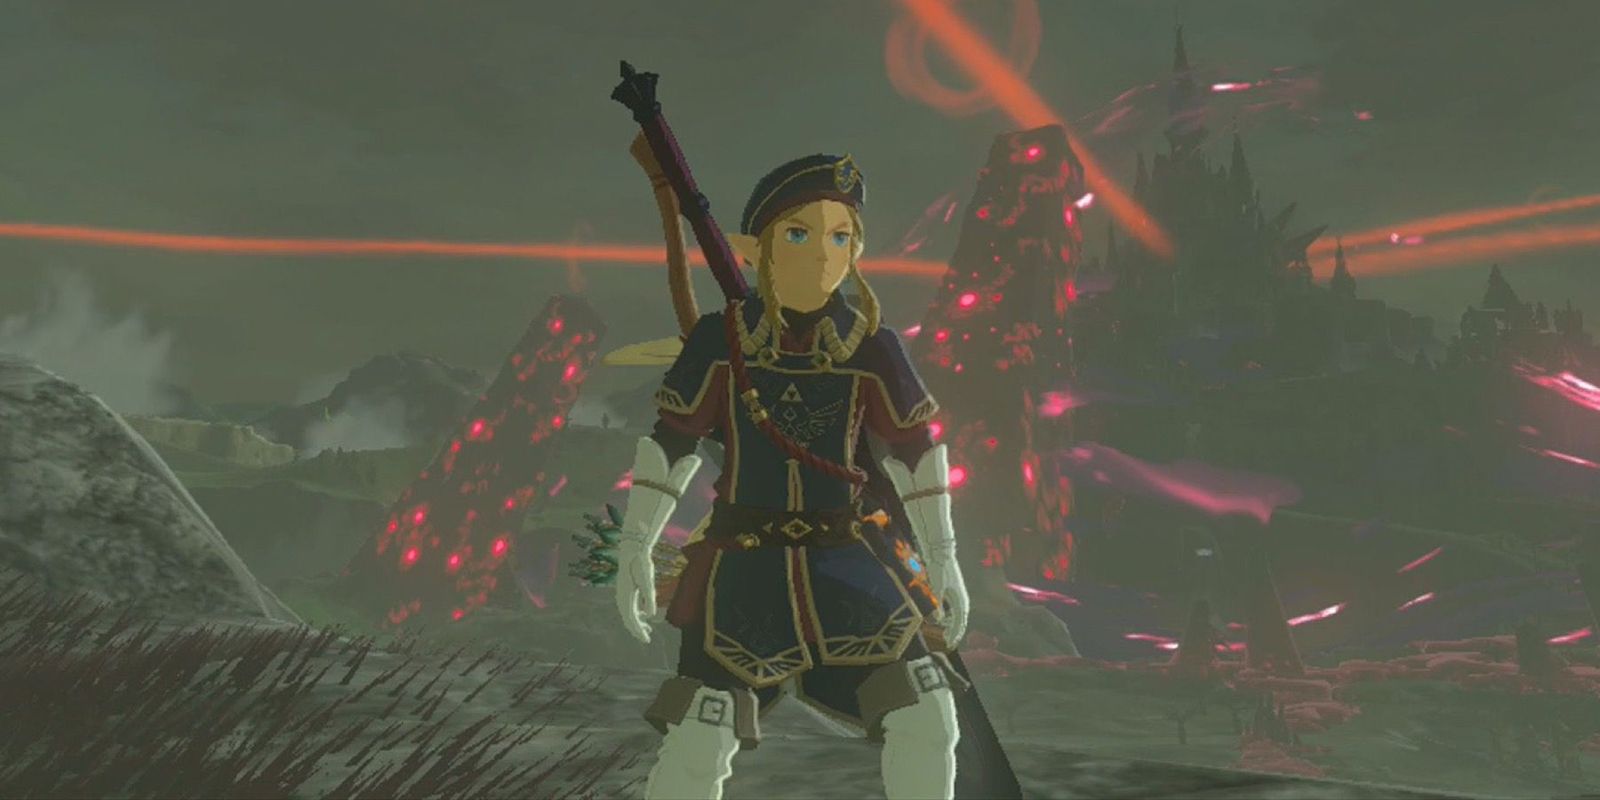 Link stands outside Hyrule Castle while wearing the Royal Guard Armor